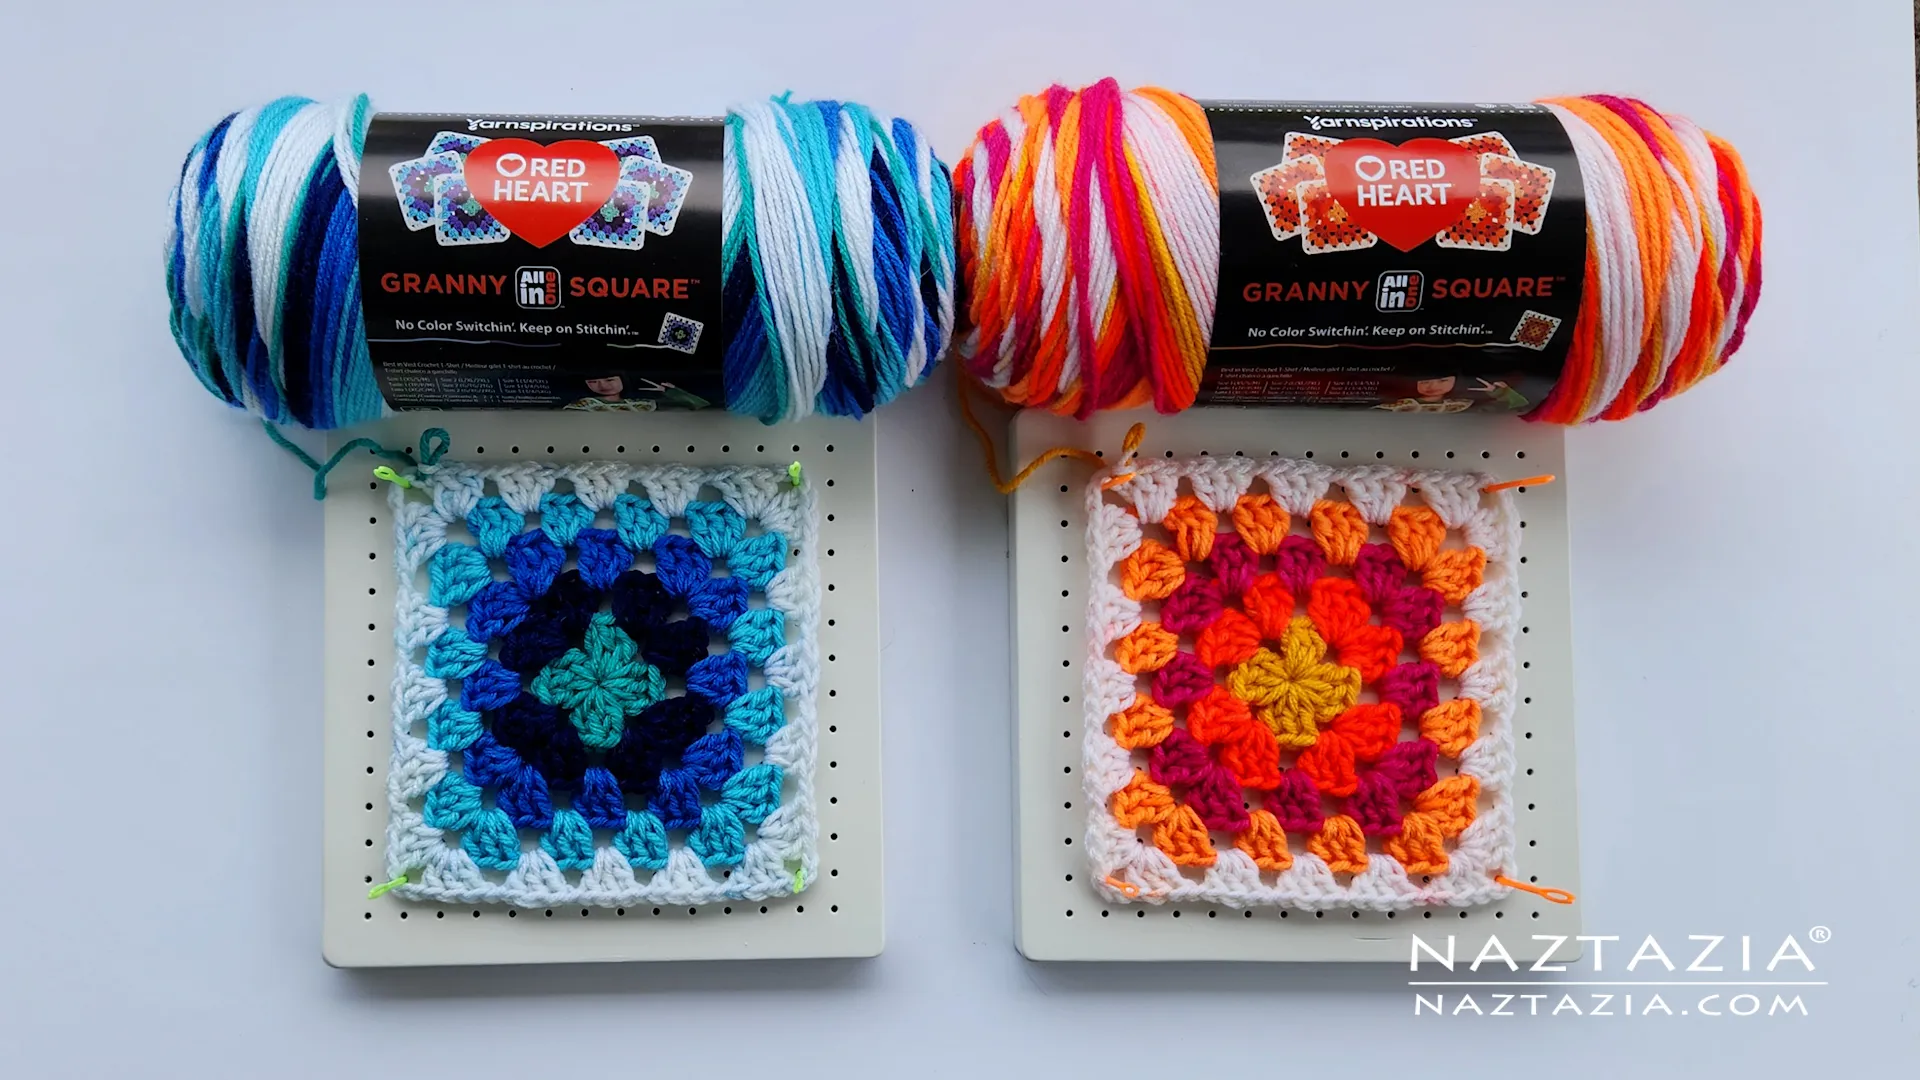 Andrea on Instagram: I decided to give my thoughts on the new Red Heart  All in One Granny Square yarn. I also go through my process of making a  traditional granny, mitered